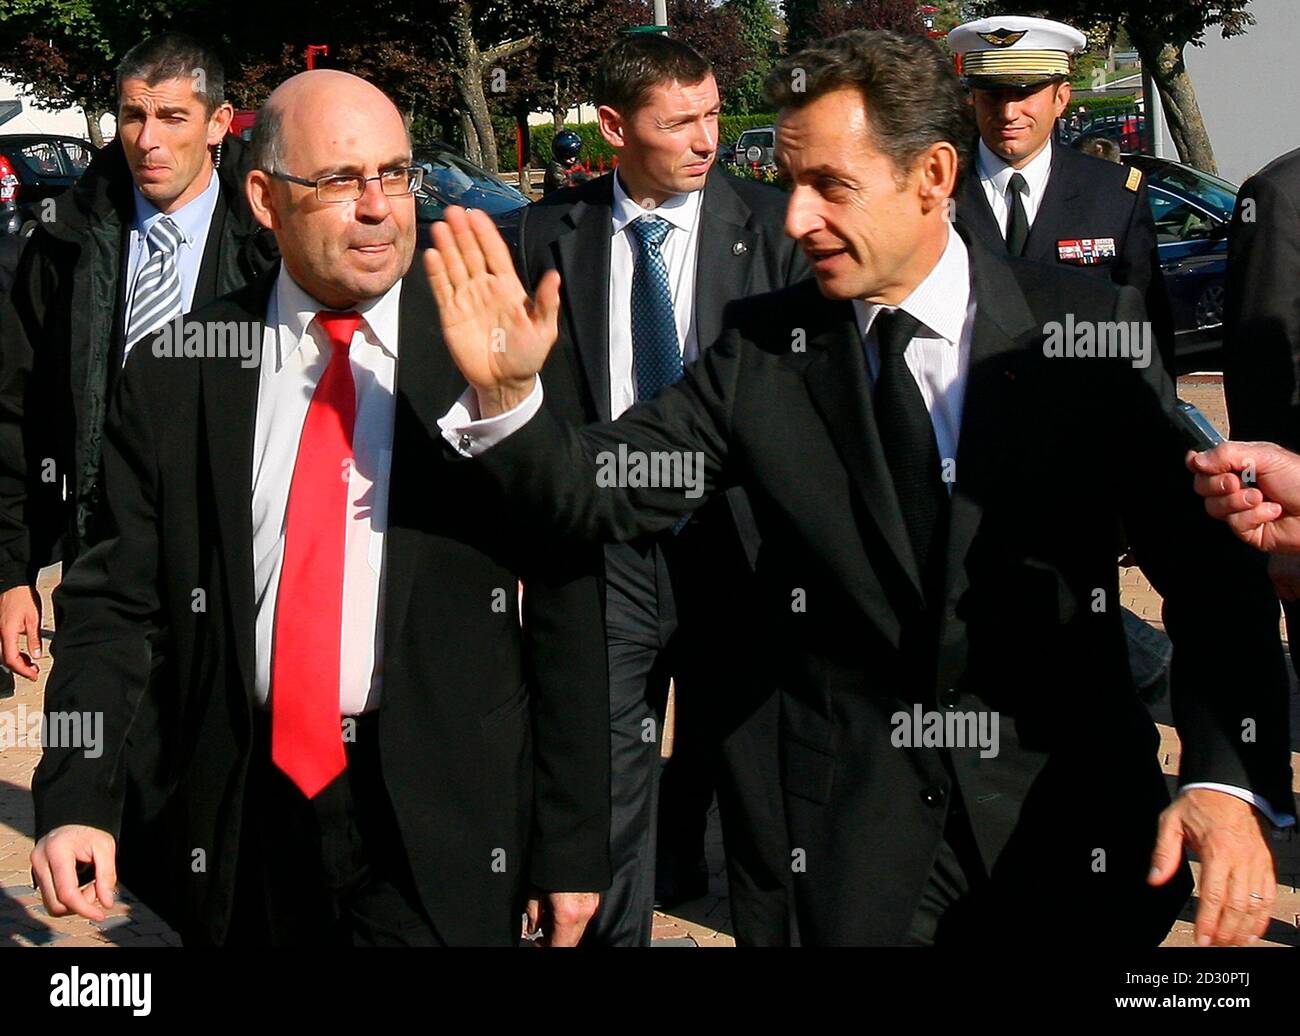 France's President Nicolas Sarkozy (R) and Henri Octave, Mayor of Gandrange, arrive for a meeting with union representatives of Gandrange's Arcelor-Mittal's steel factory and elected representatives at Gandrange city hall October 15, 2009.  REUTERS/Pascal Brocard/Le Republicain Lorrain/Pool   (FRANCE POLITICS EMPLOYMENT BUSINESS) Stock Photo